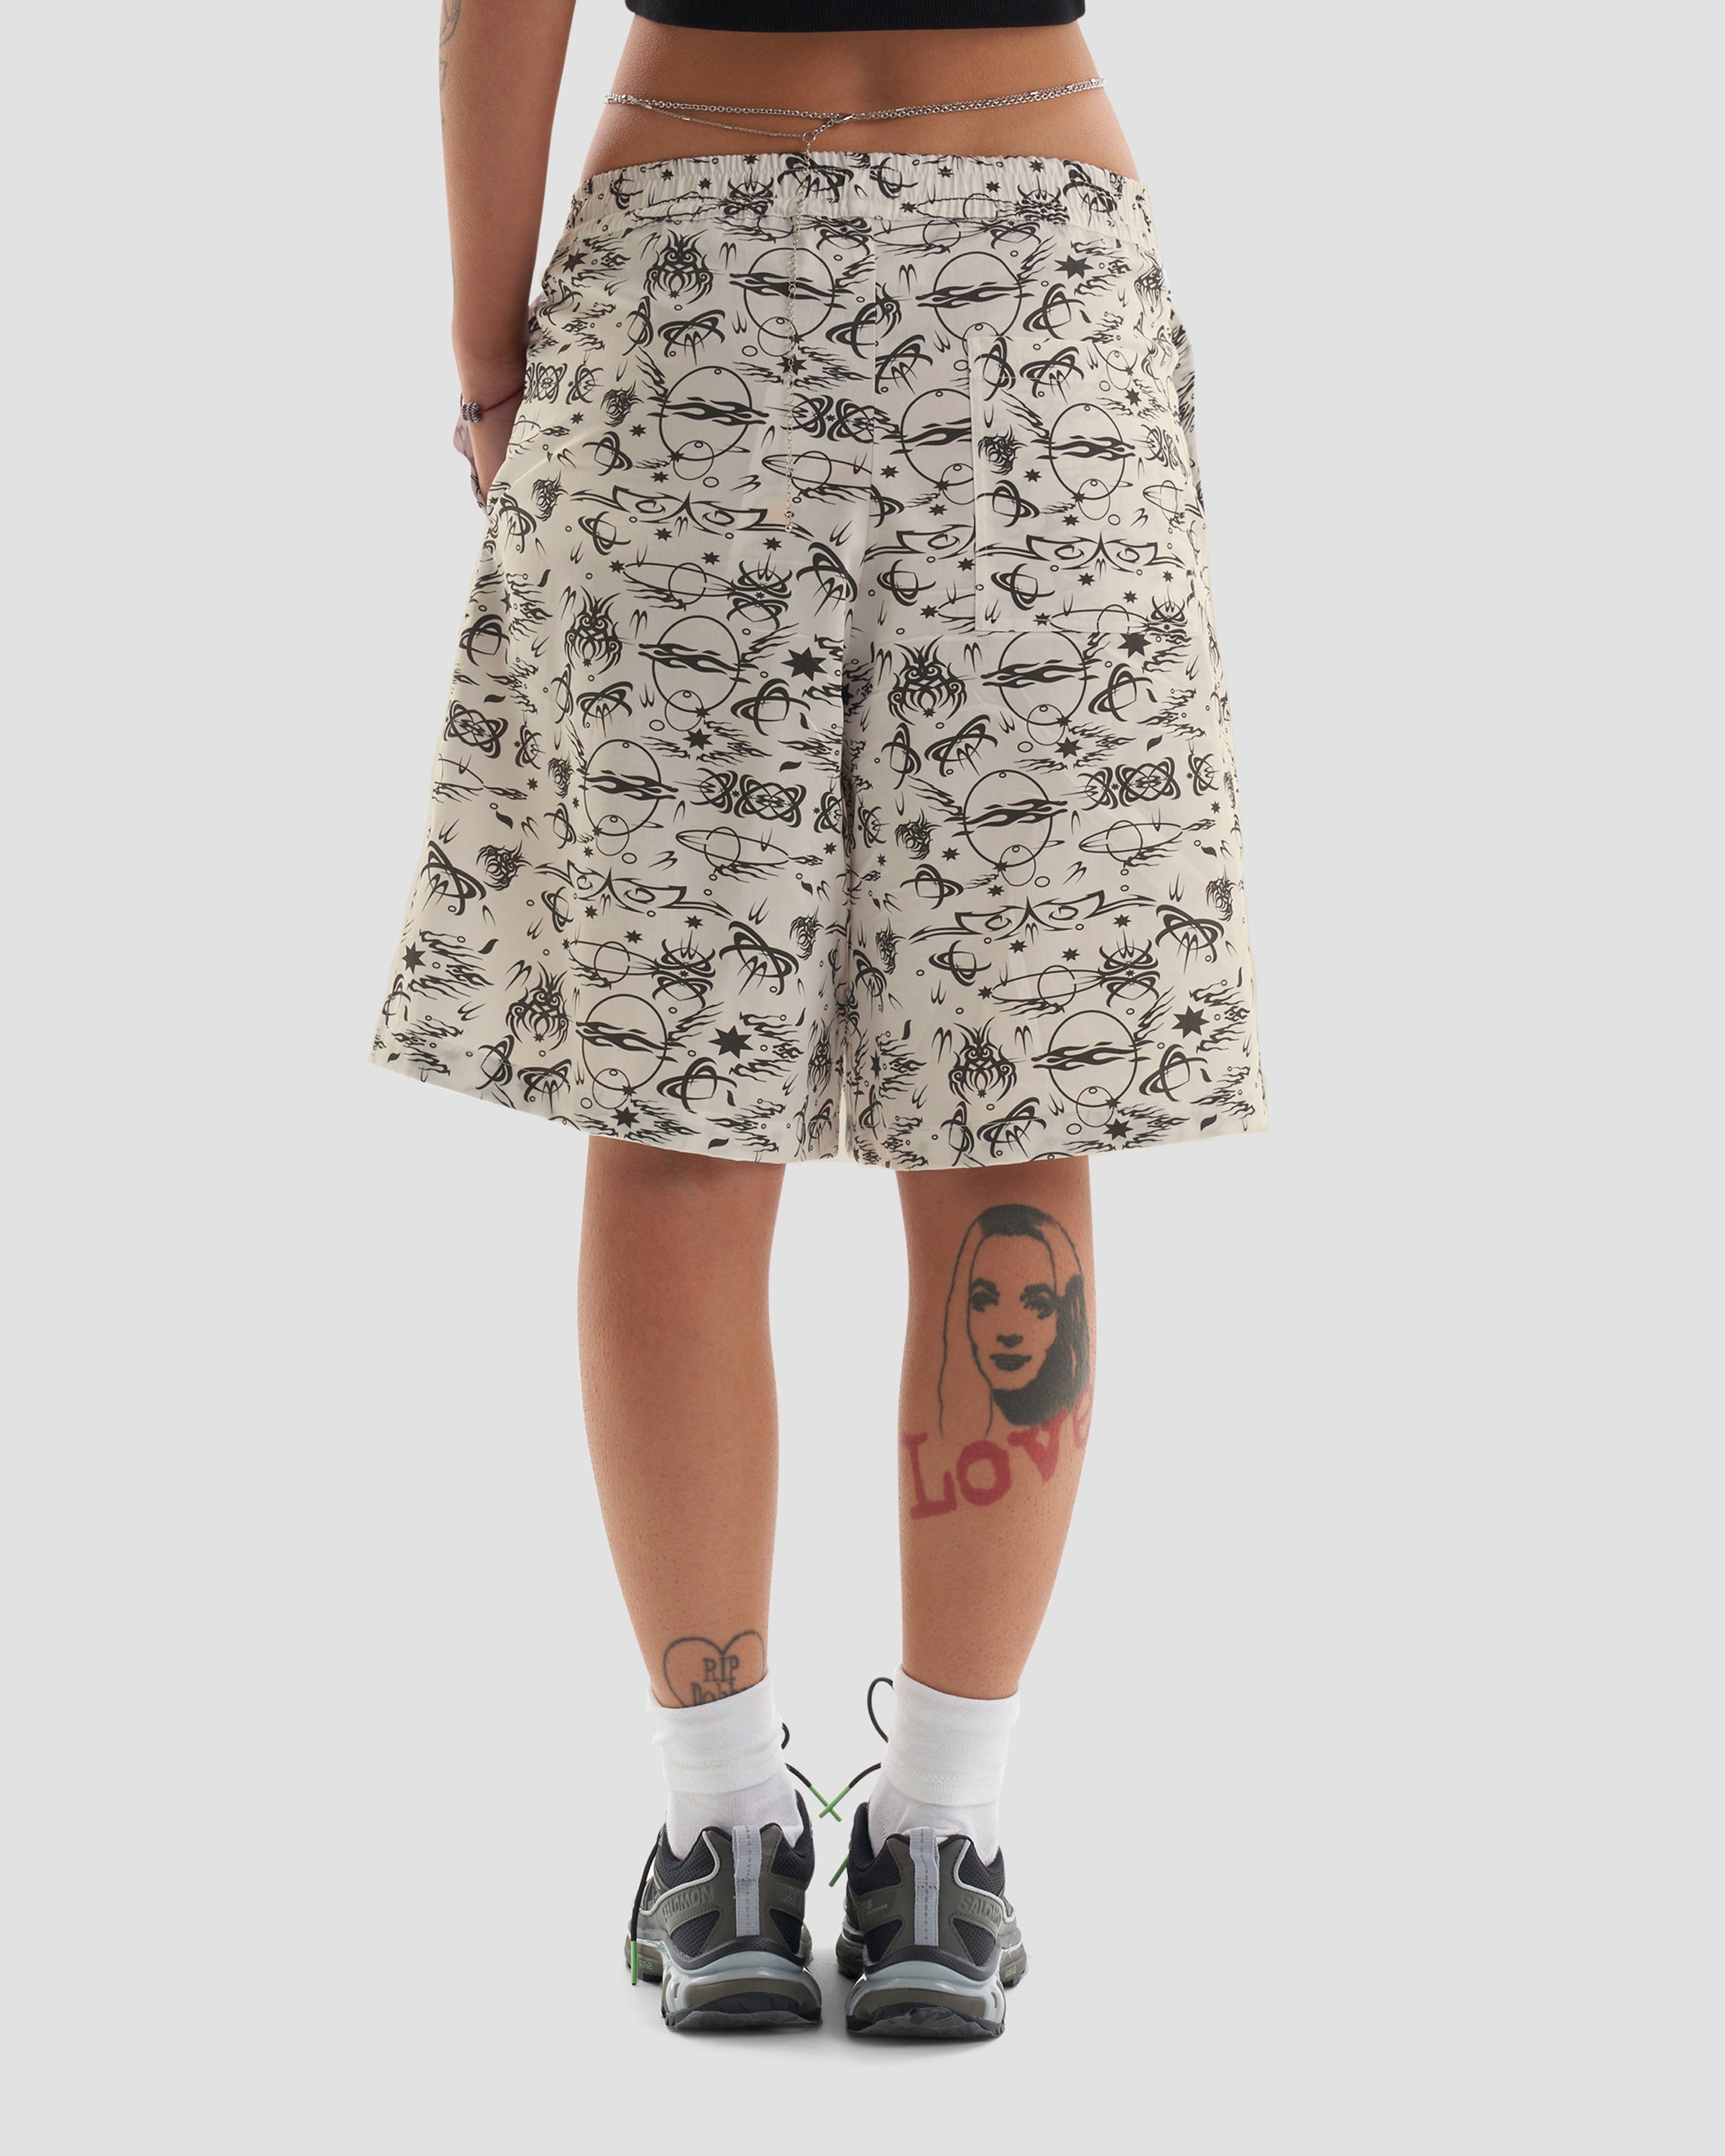 No Regrets Oversized Surfer Shorts with Tattoo Print in Ecru